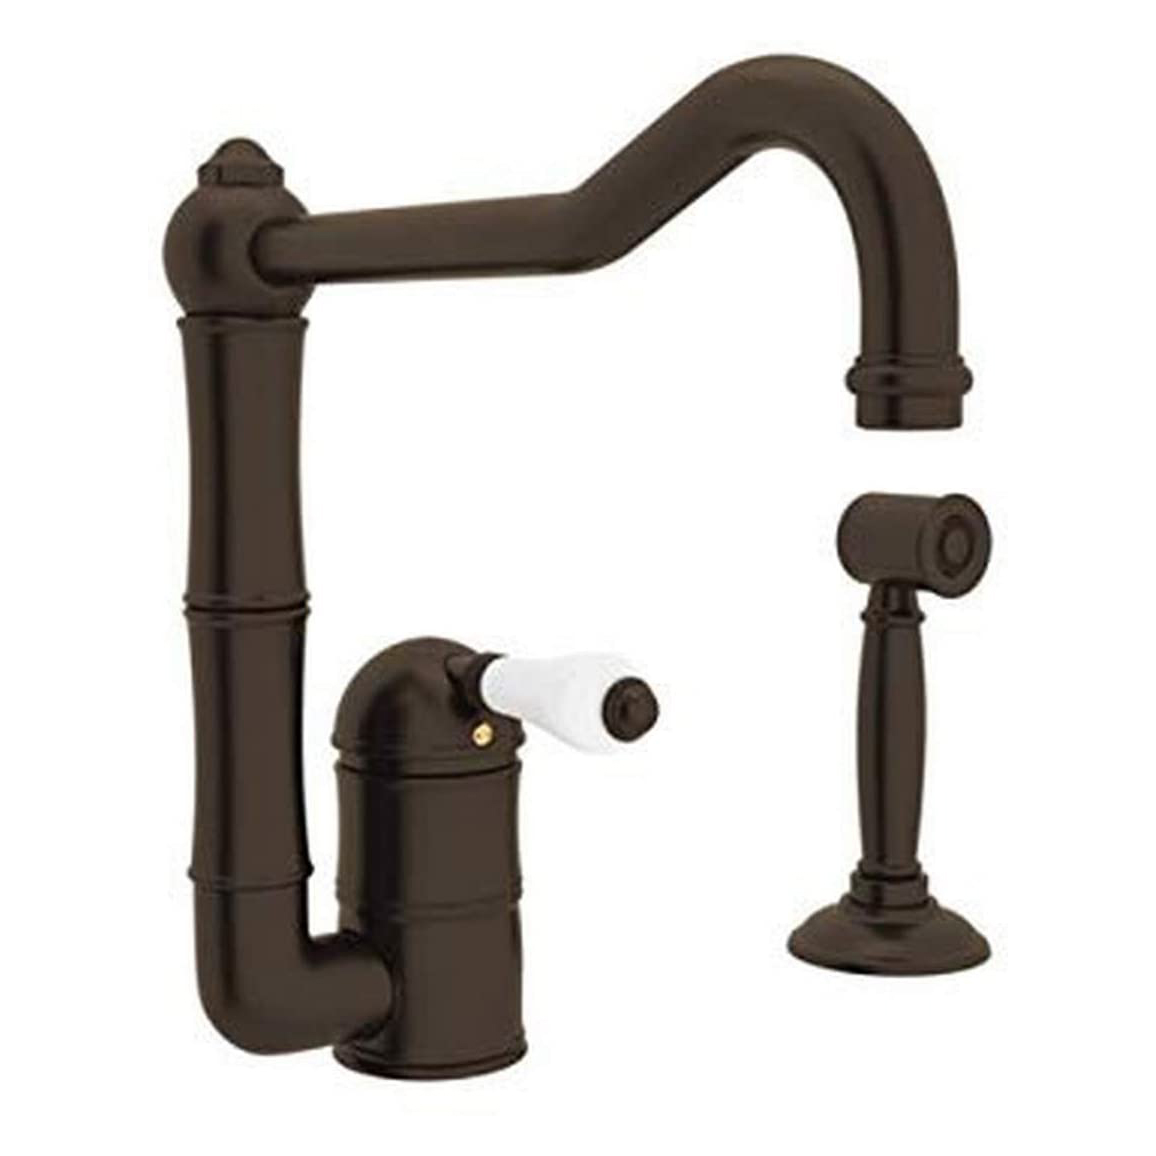 Italian Country Kitchen Faucet in Tuscan Bronze w/Porcelain Lever & Spray